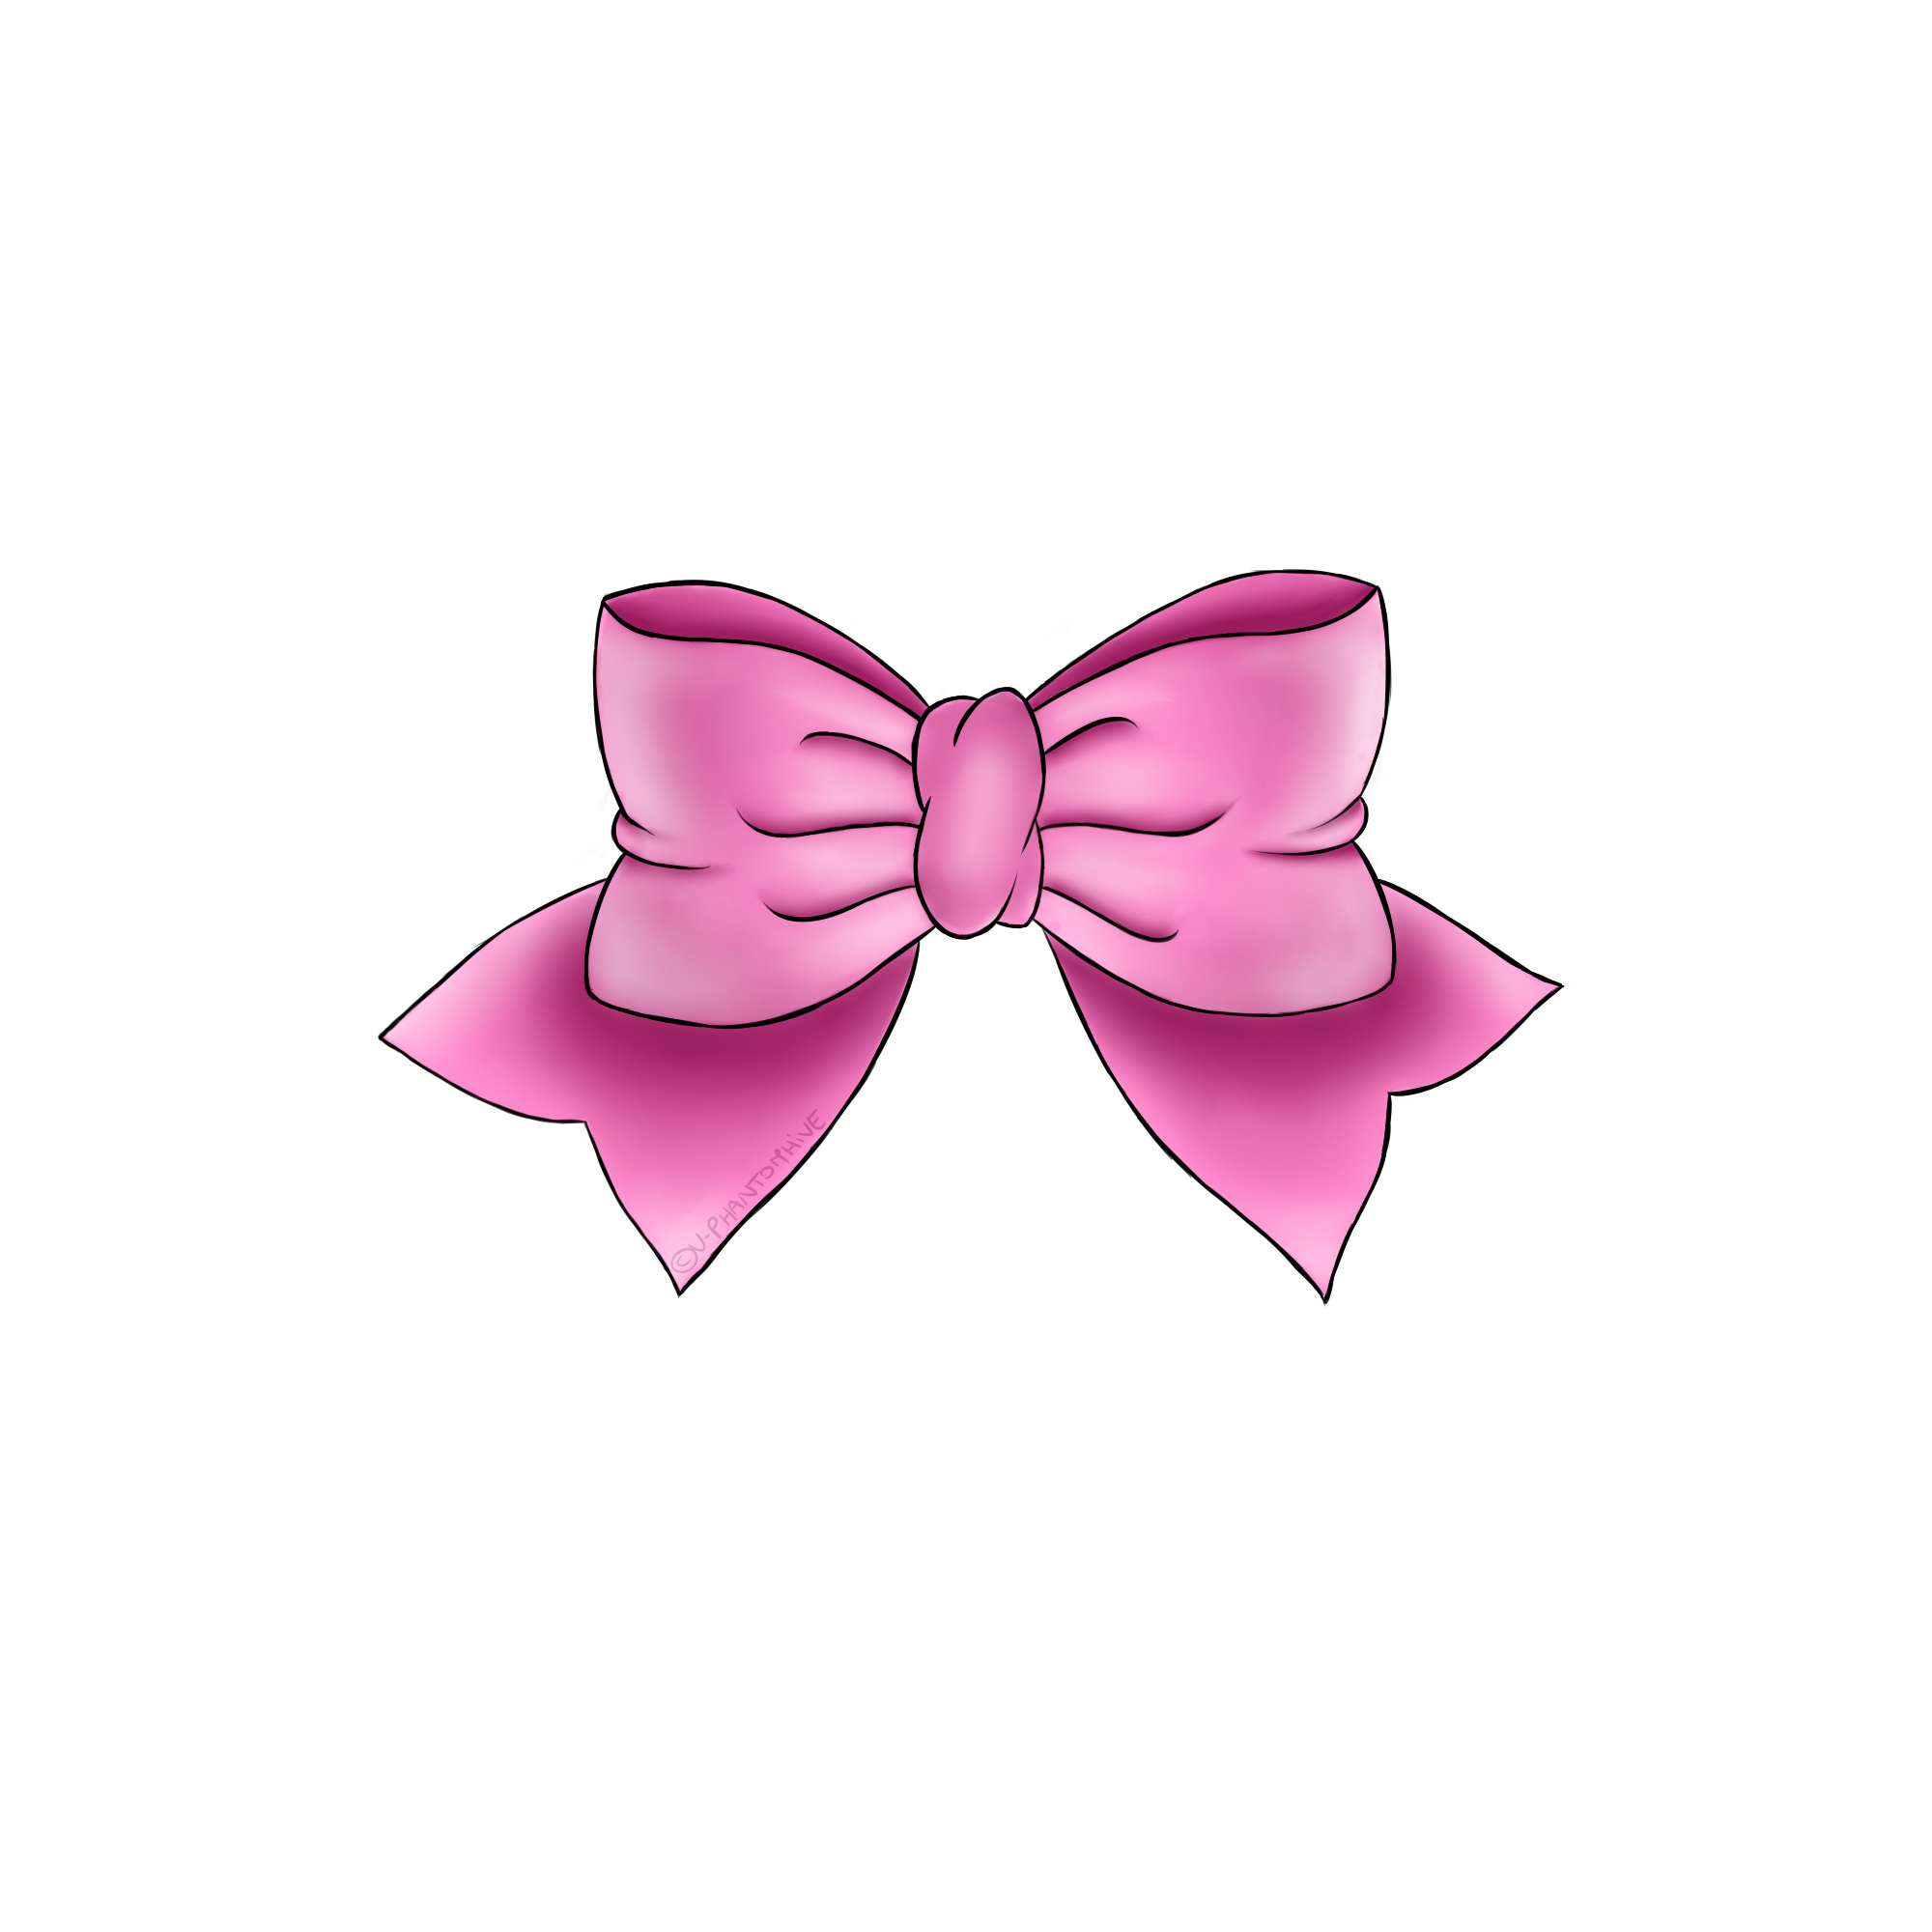 Pink Ribbon PNG by yotoots on DeviantArt